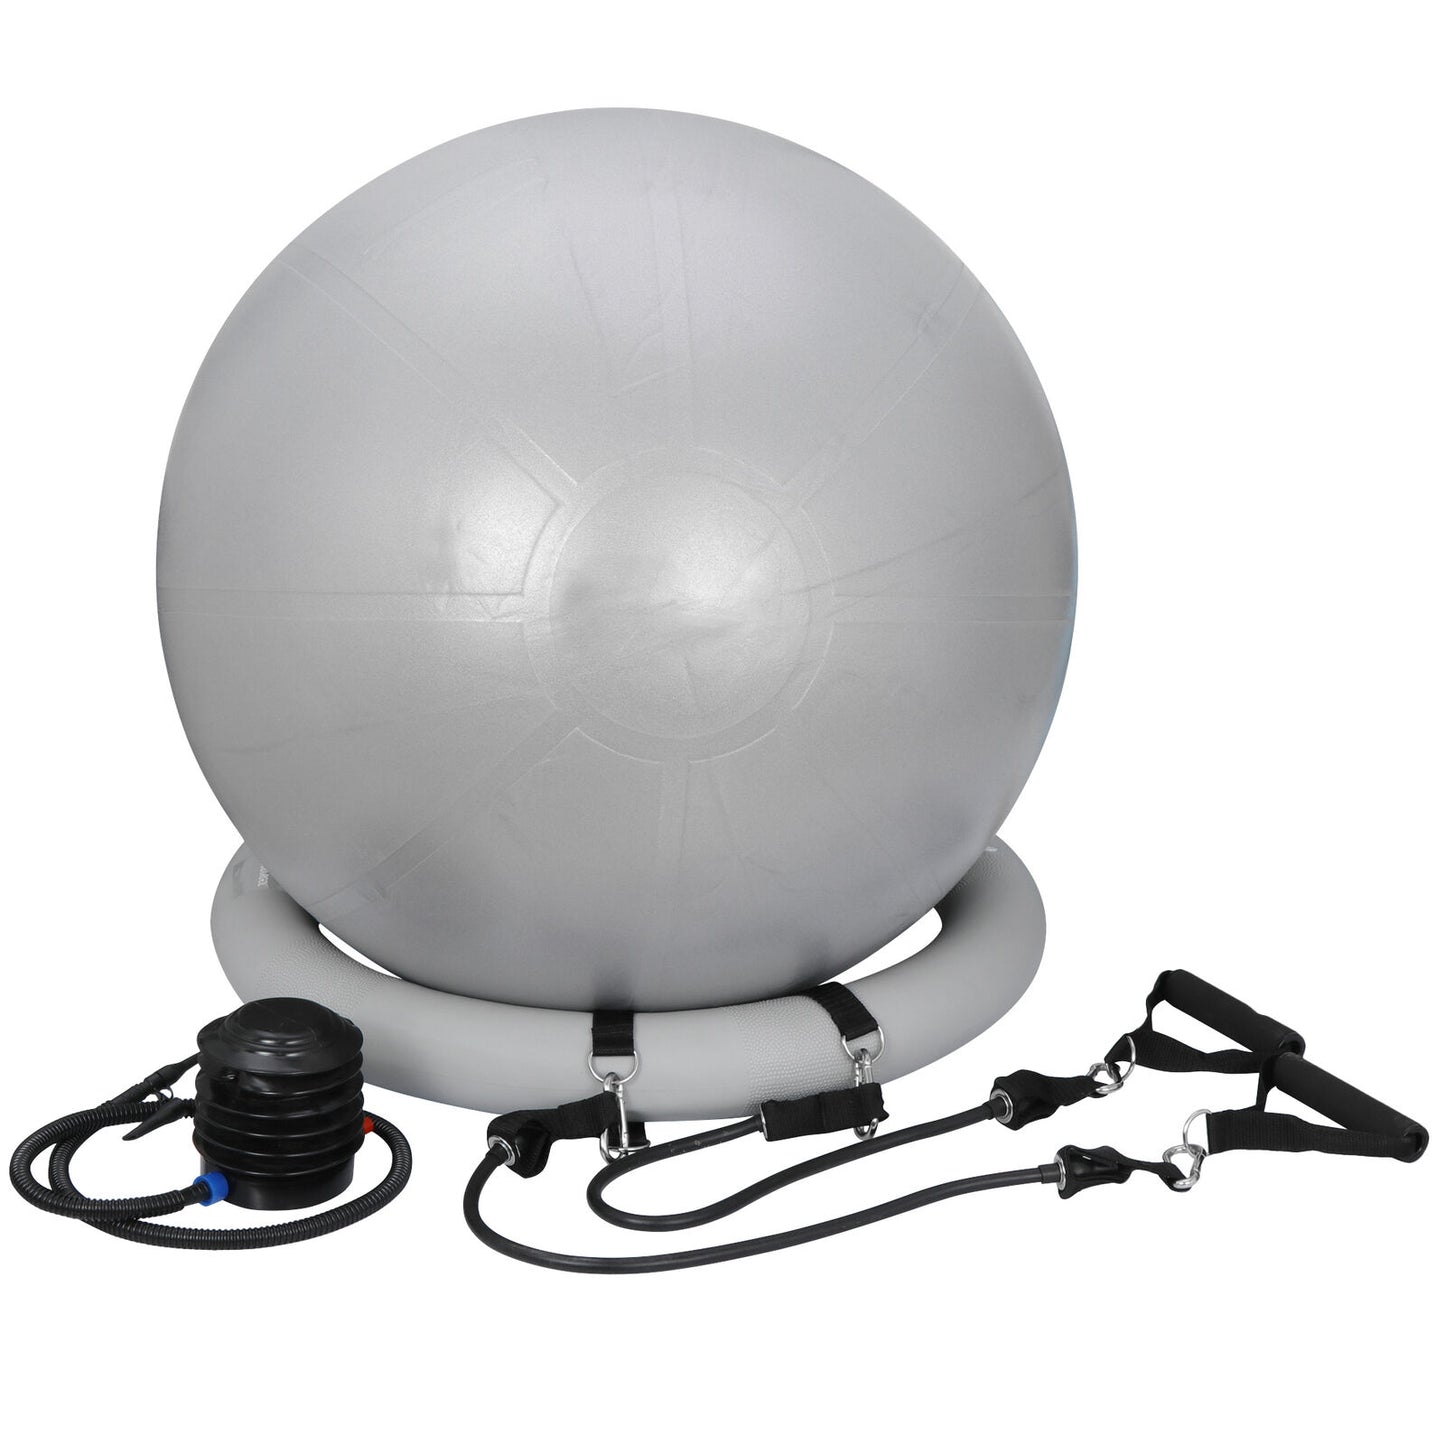 25.6"Exercise Fitness Yoga Pilate Ball Stability Base W/Workout Guide,Quick Pump